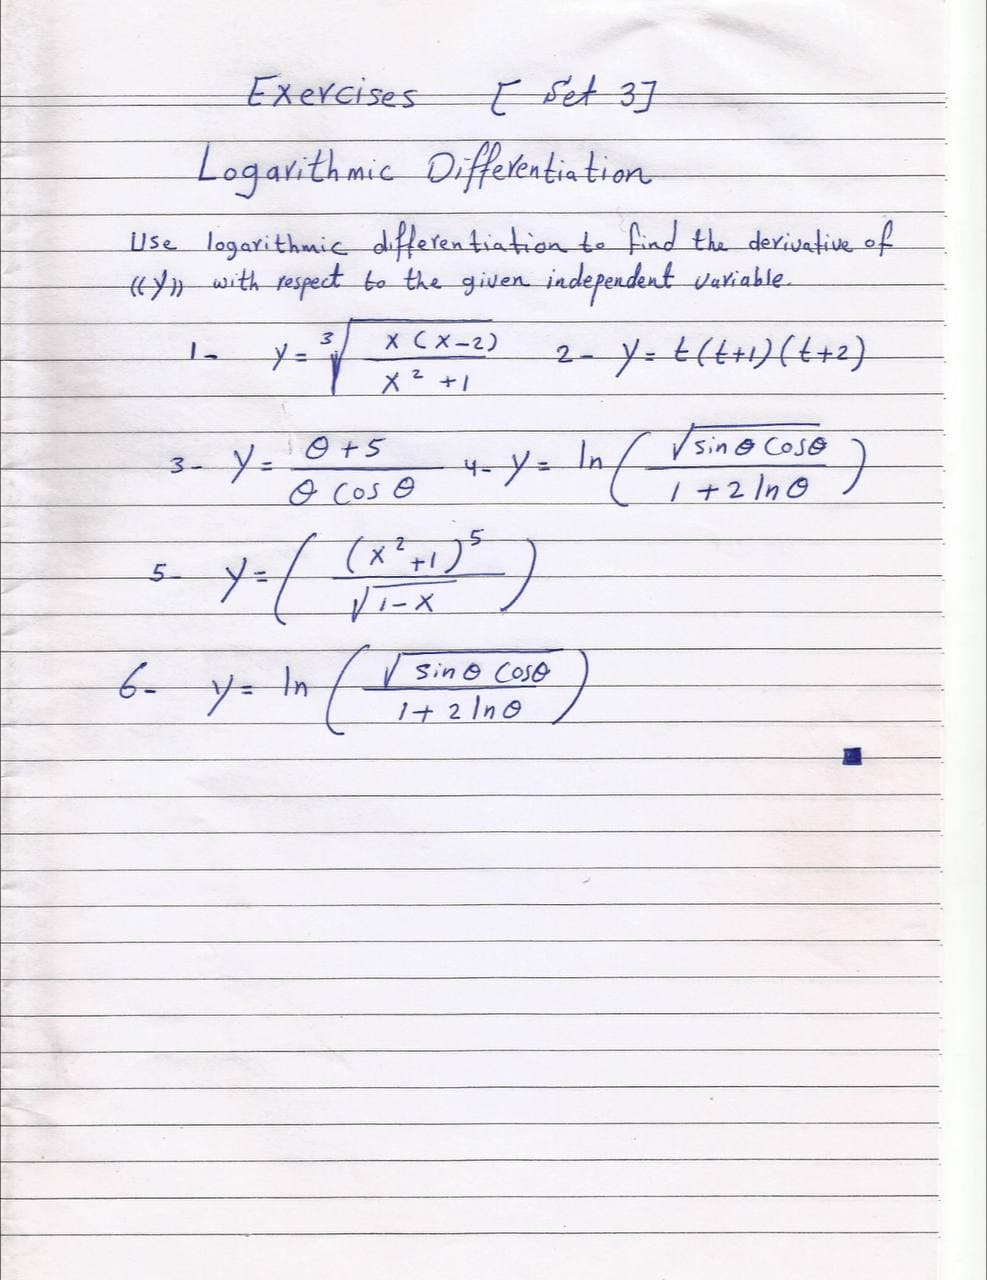 Exercises
E Set 37
Logarithmic Diffeleatintion
Use logarithmic differen tiation te find the derivative of
# with respect bo the given independenut vakiable
X Cx-2)
メ+」
2- y=614+り(t+2)
4-Y= Inf Vsin o Coso
| +2In0
o Cos e
5.
Sin O Coso
yー
1け2 1no
